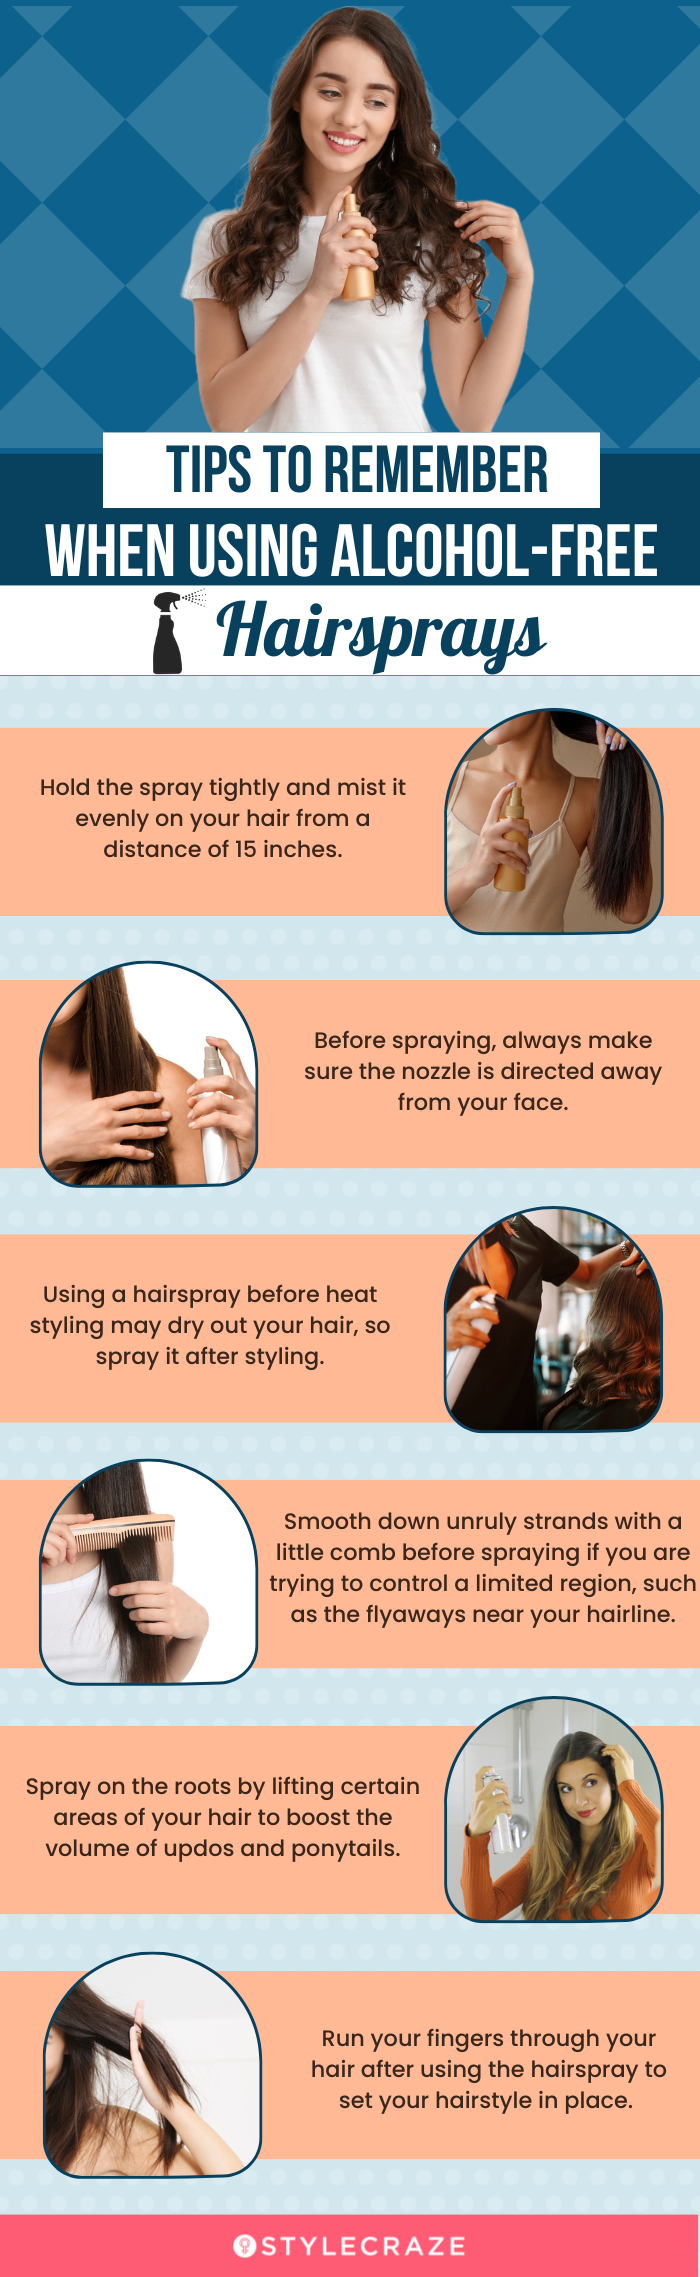 Tips To Remember When Using Alcohol-Free Hair Spray (infographic)